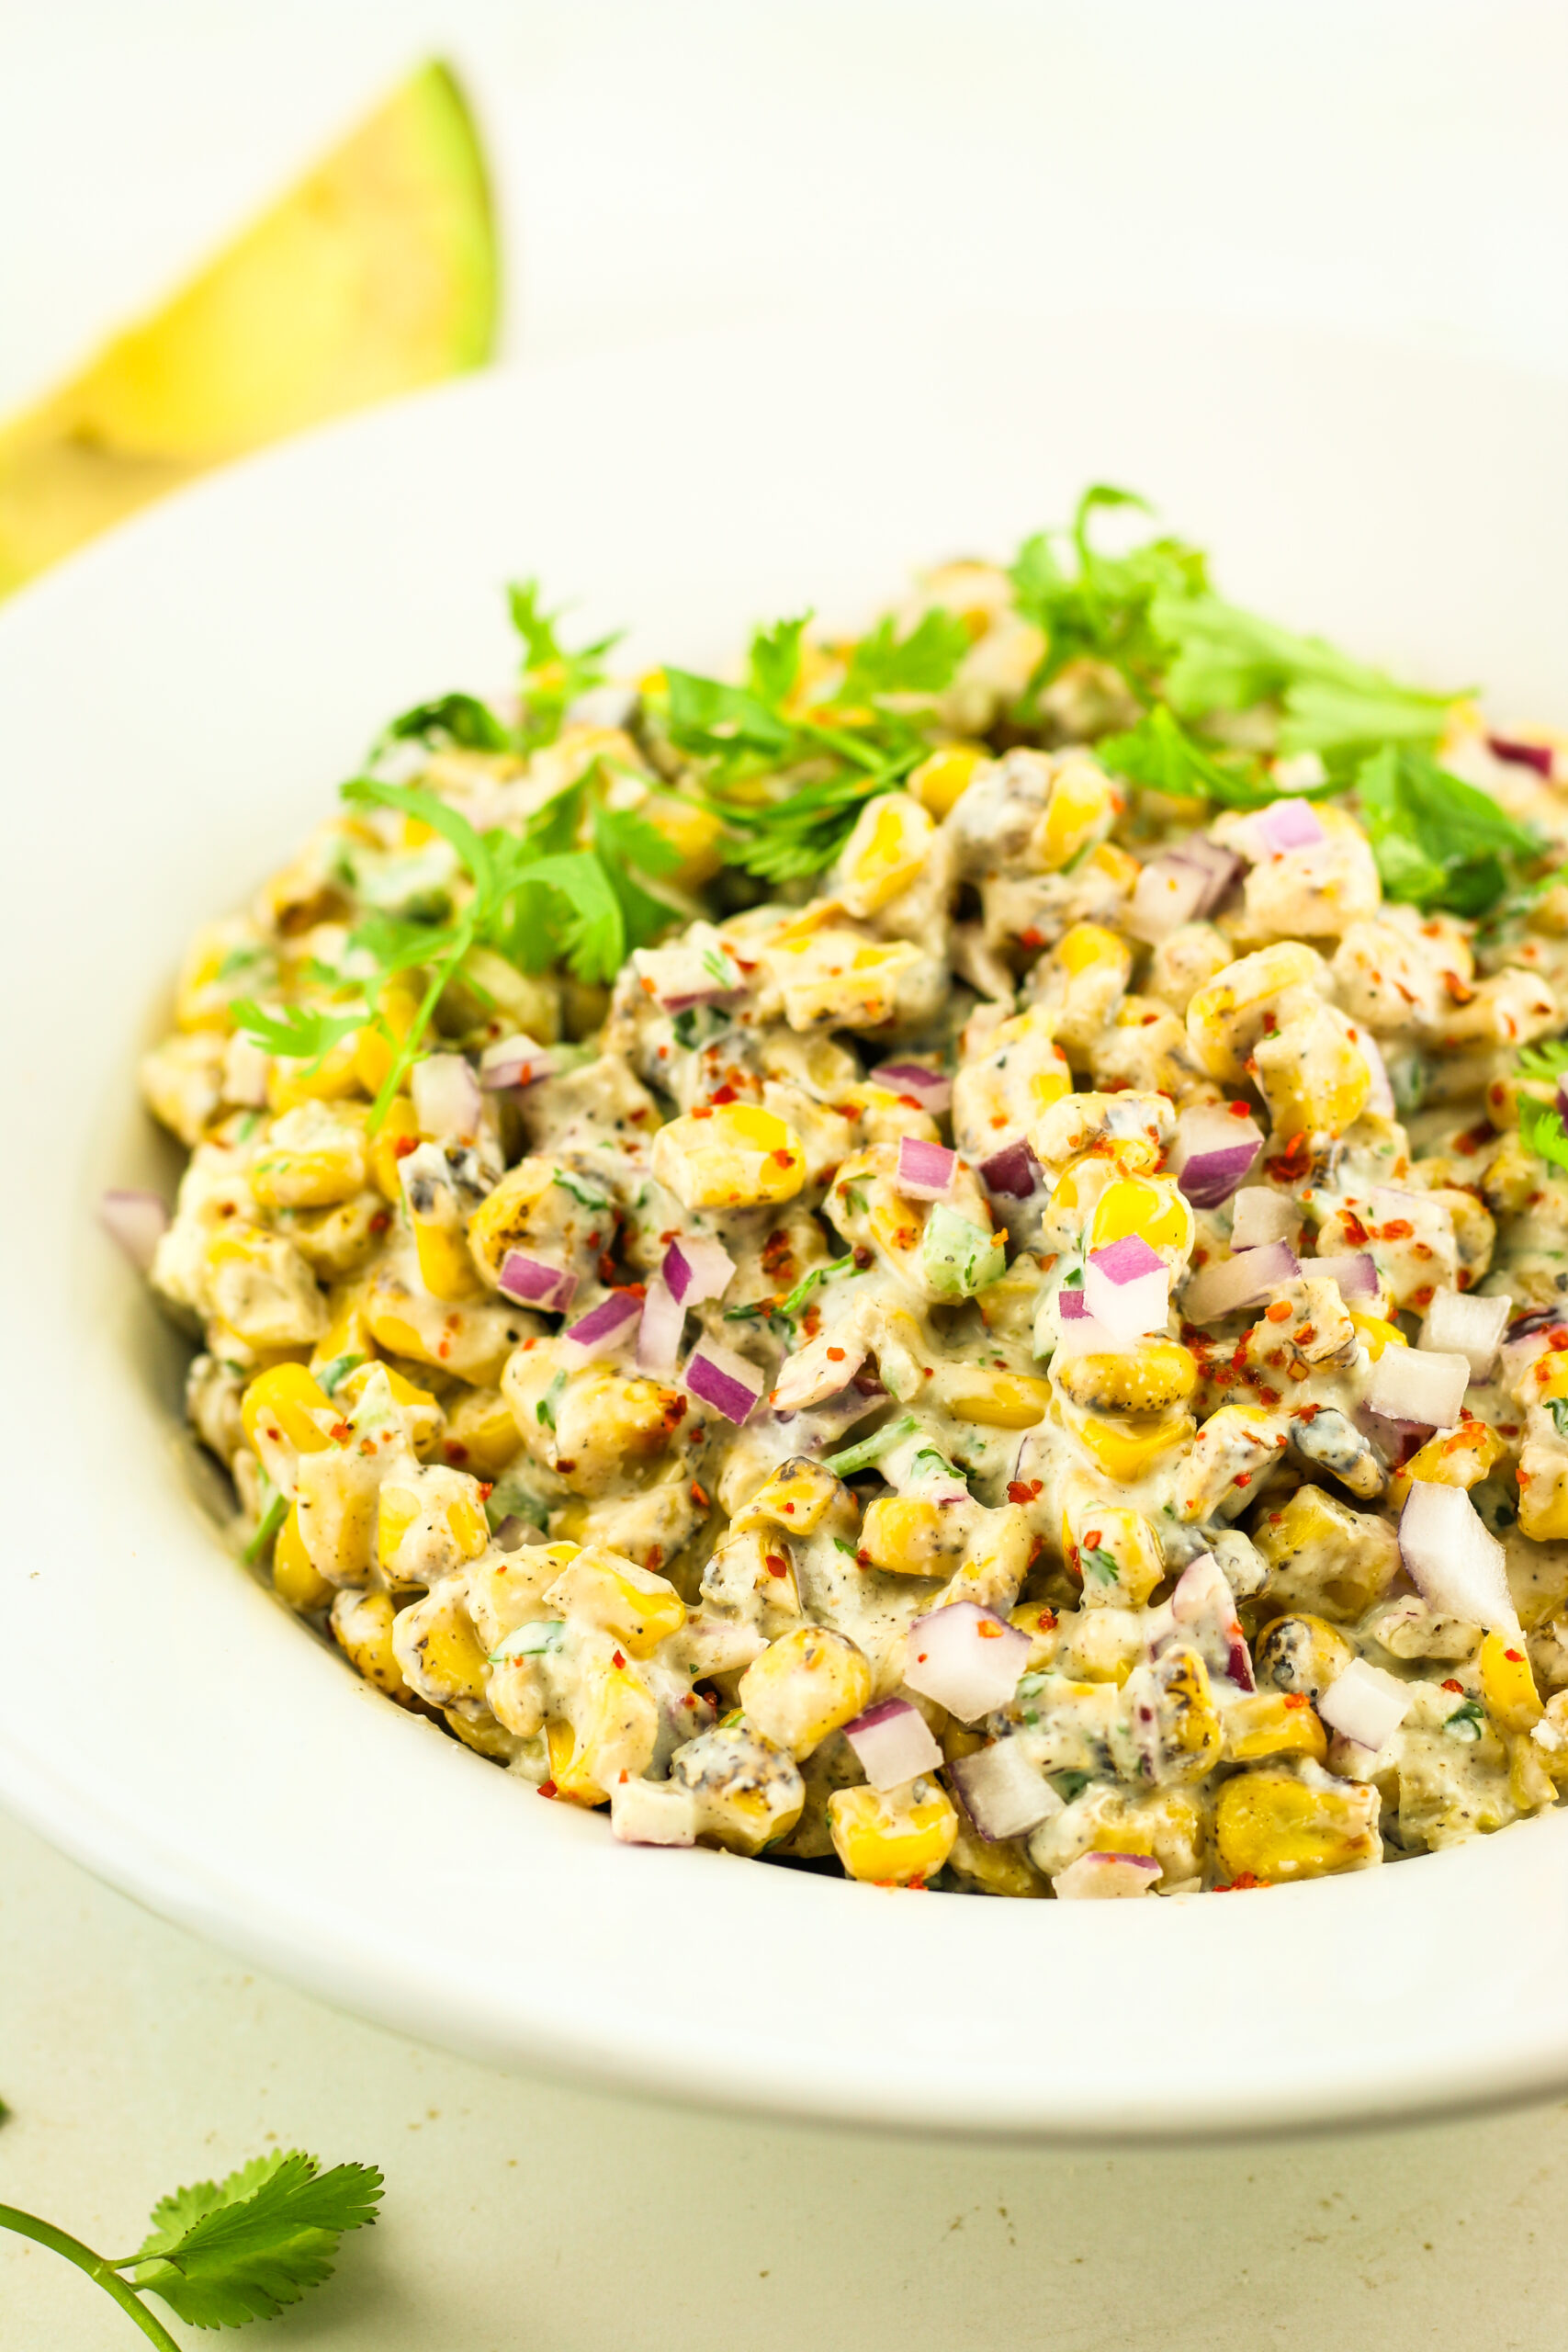 Cottage cheese Mexican street corn dip. A sweet corn side dish with added protein.